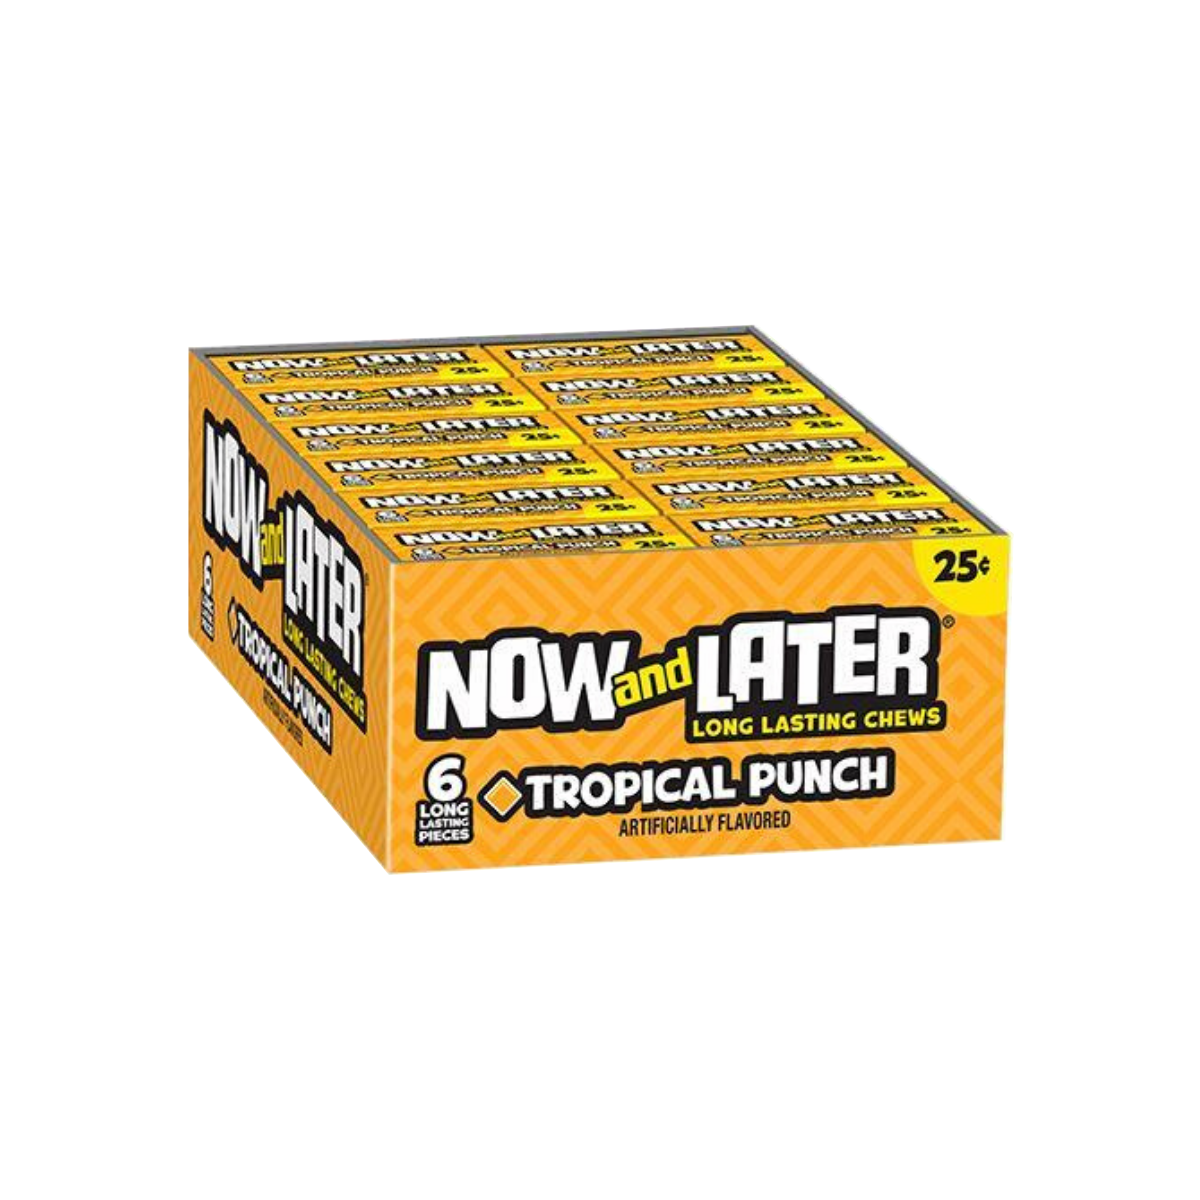 discontinued now and later flavors